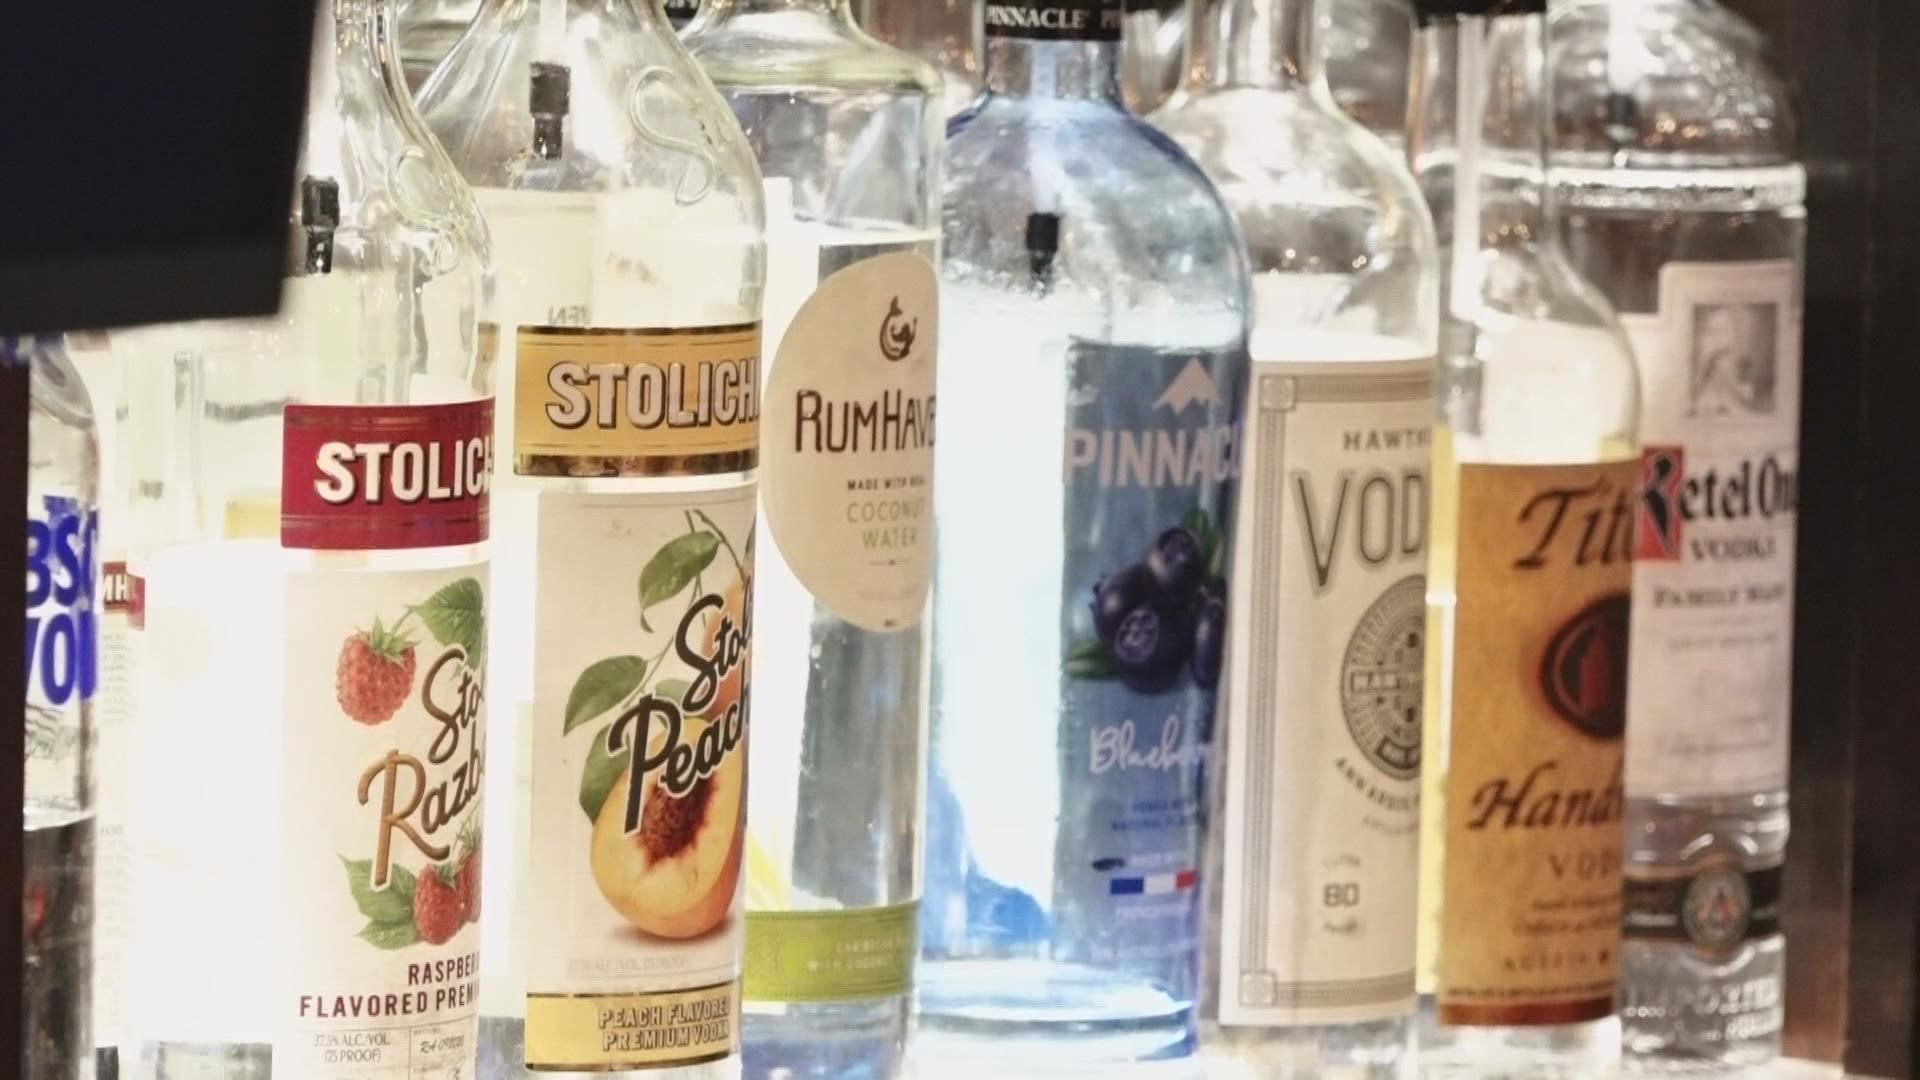 Choosing to not serve Russian-made vodka may be more of a symbolic move than anything.